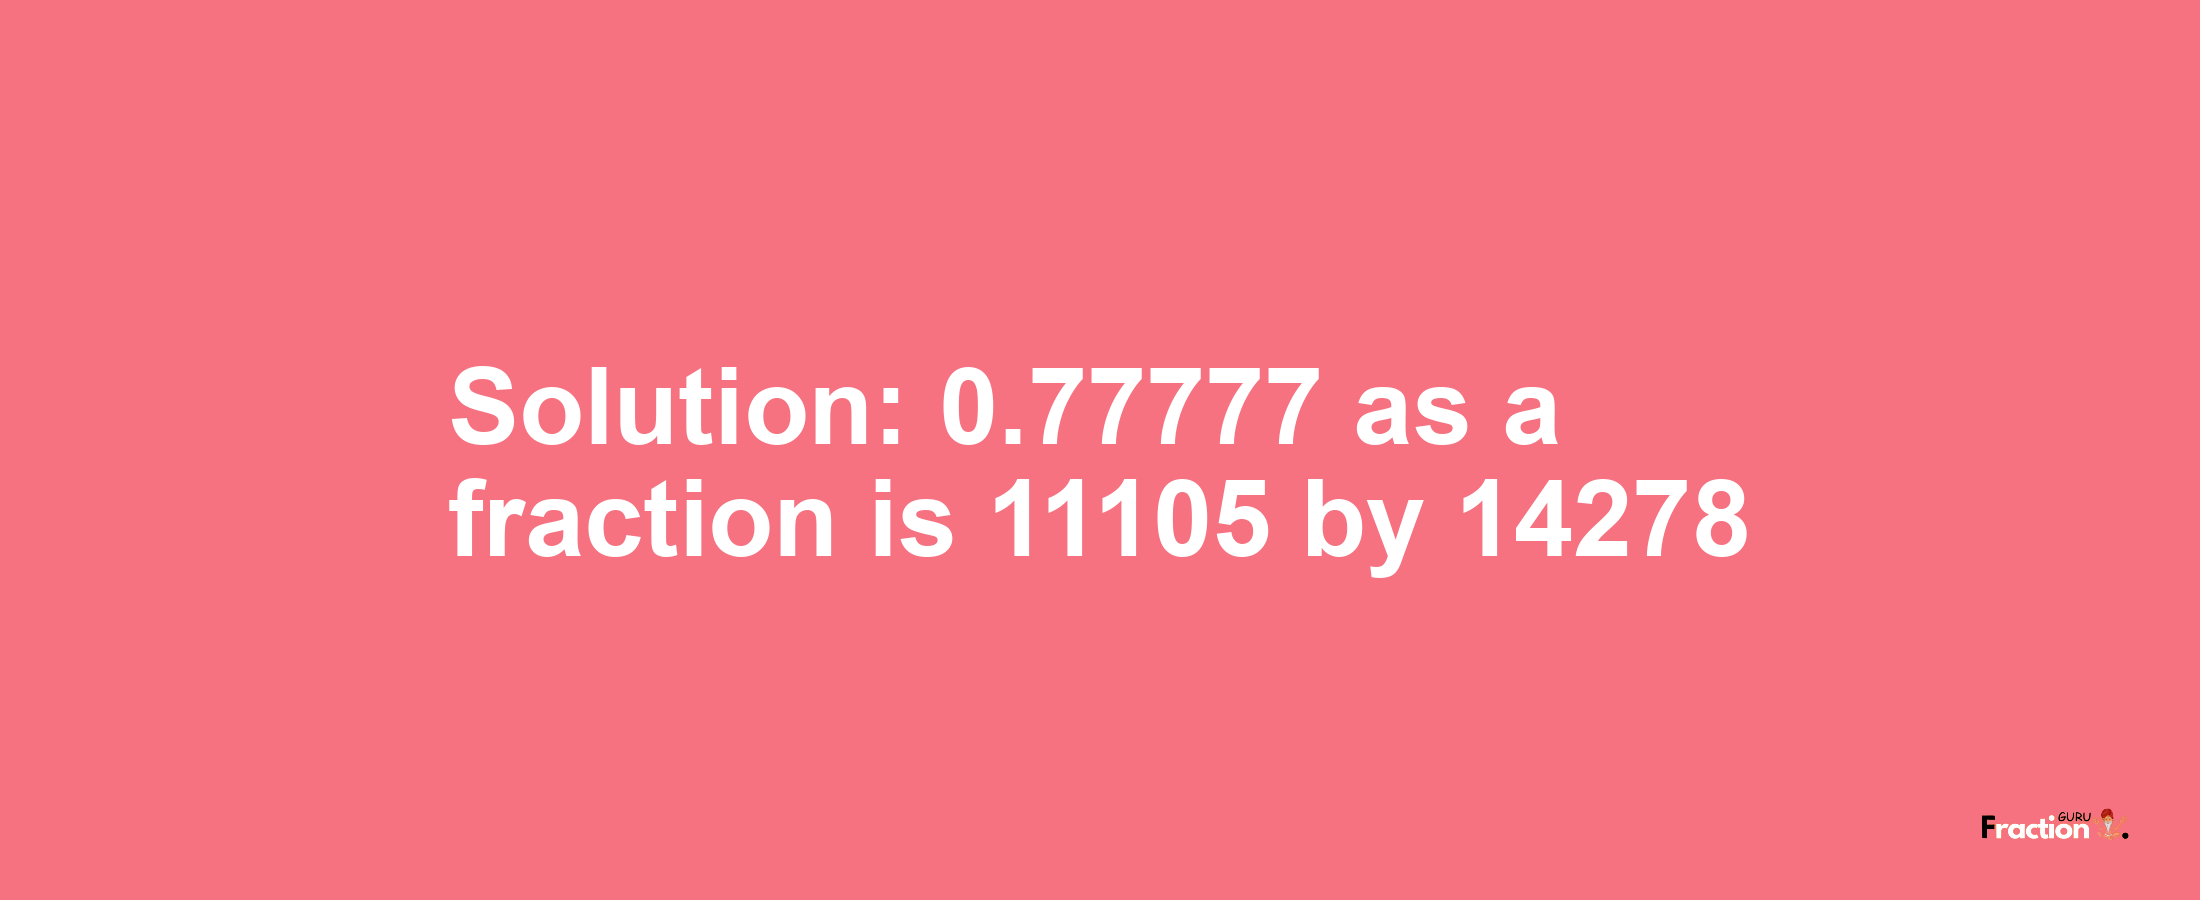 Solution:0.77777 as a fraction is 11105/14278